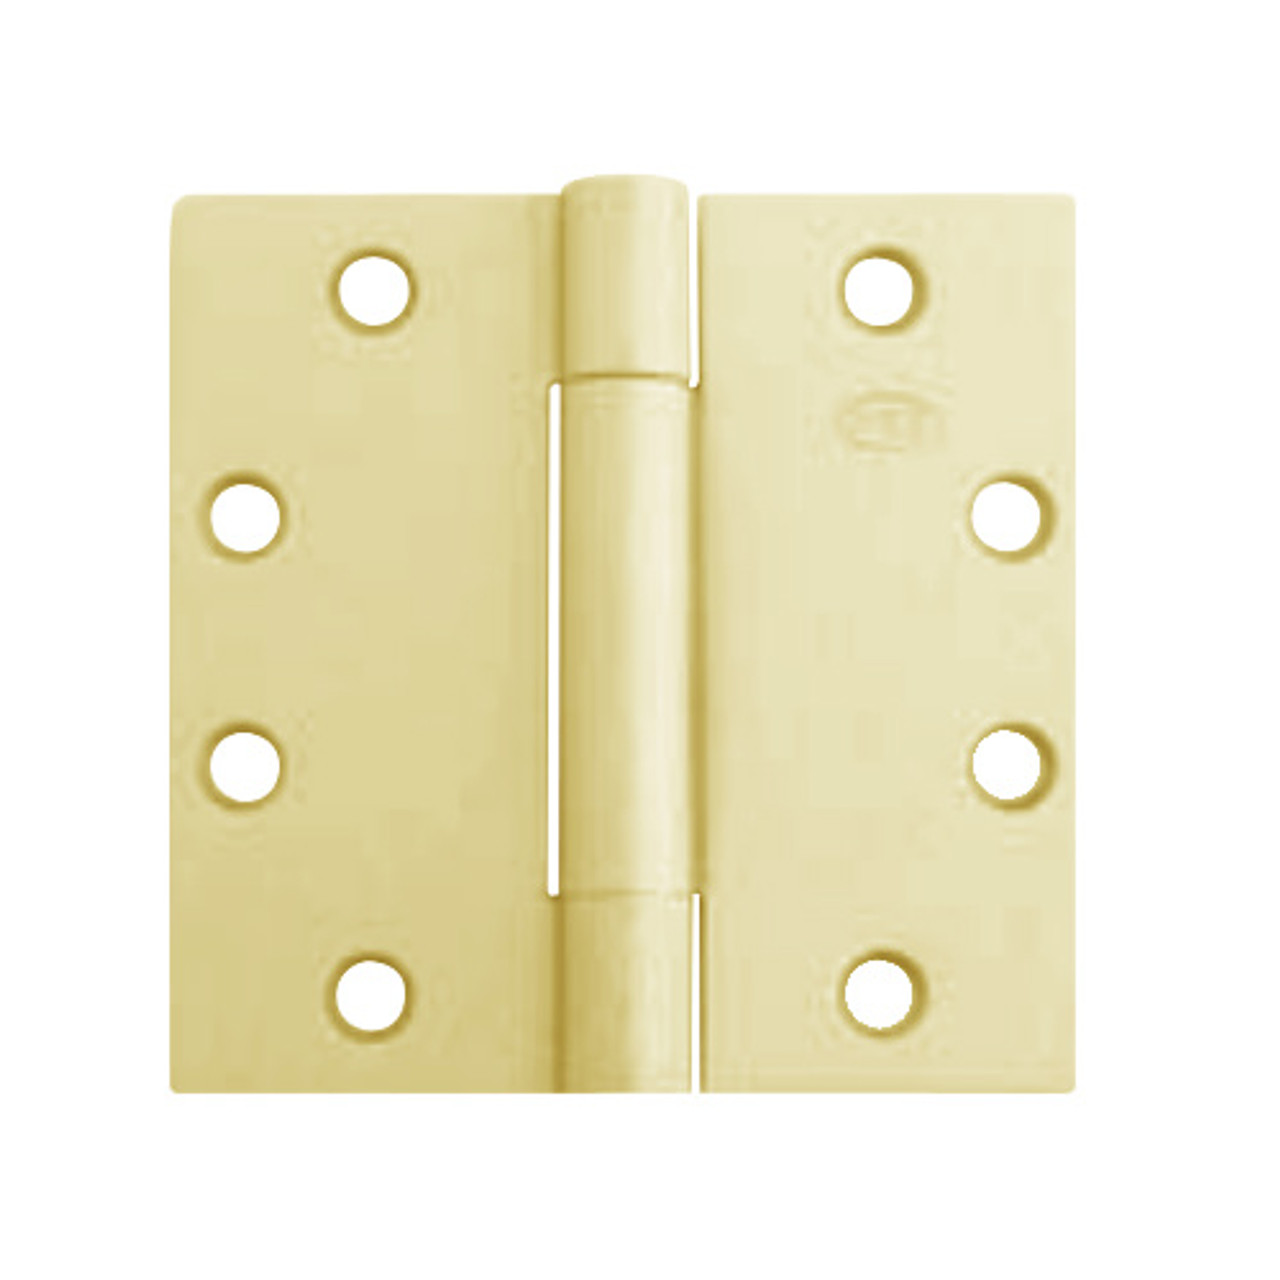 3PB1-4-5x4-633 IVES 3 Knuckle Plain Bearing Full Mortise Hinge in Satin Brass Plated